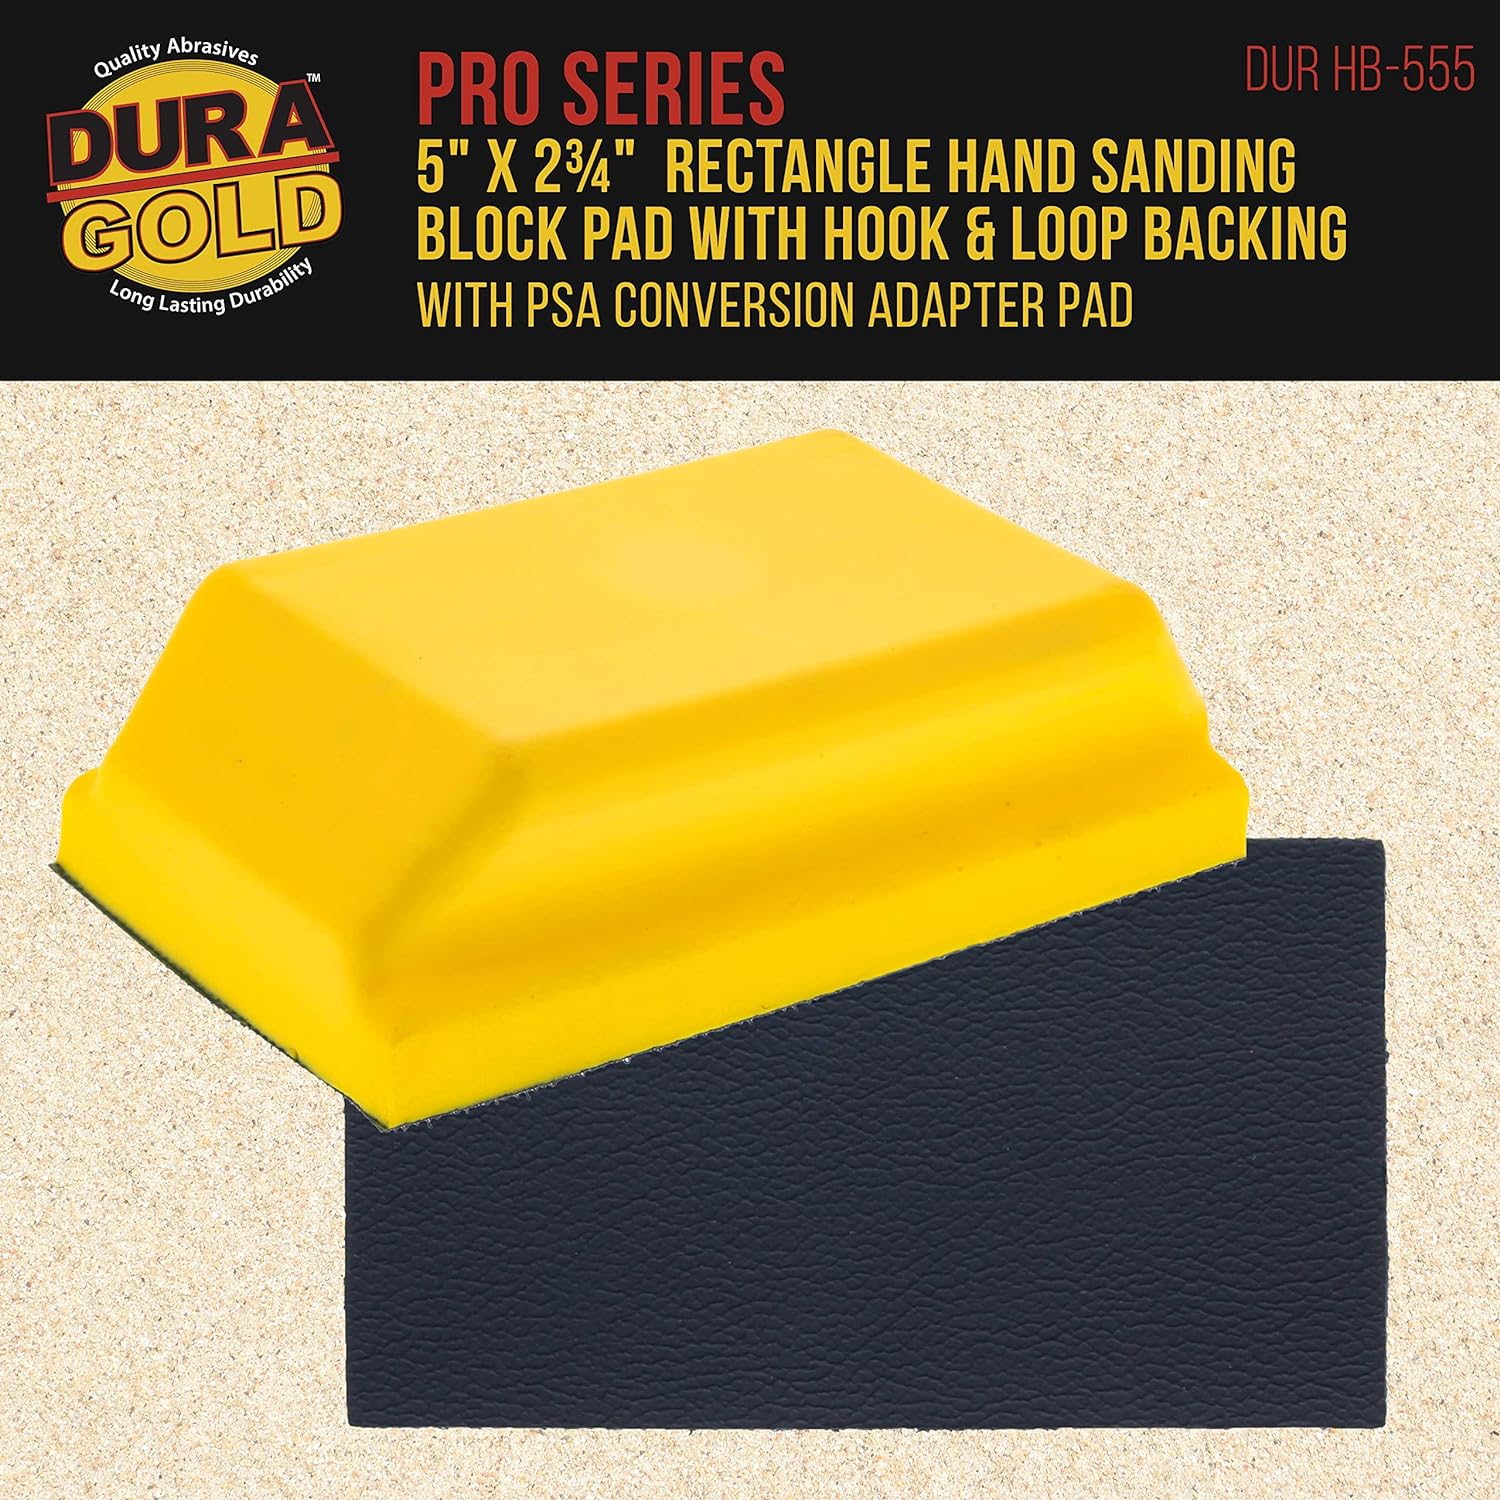 Dura-Gold Pro Series Rectangle 5" x 2-3/4" Hand Sanding Block Pad with Hook